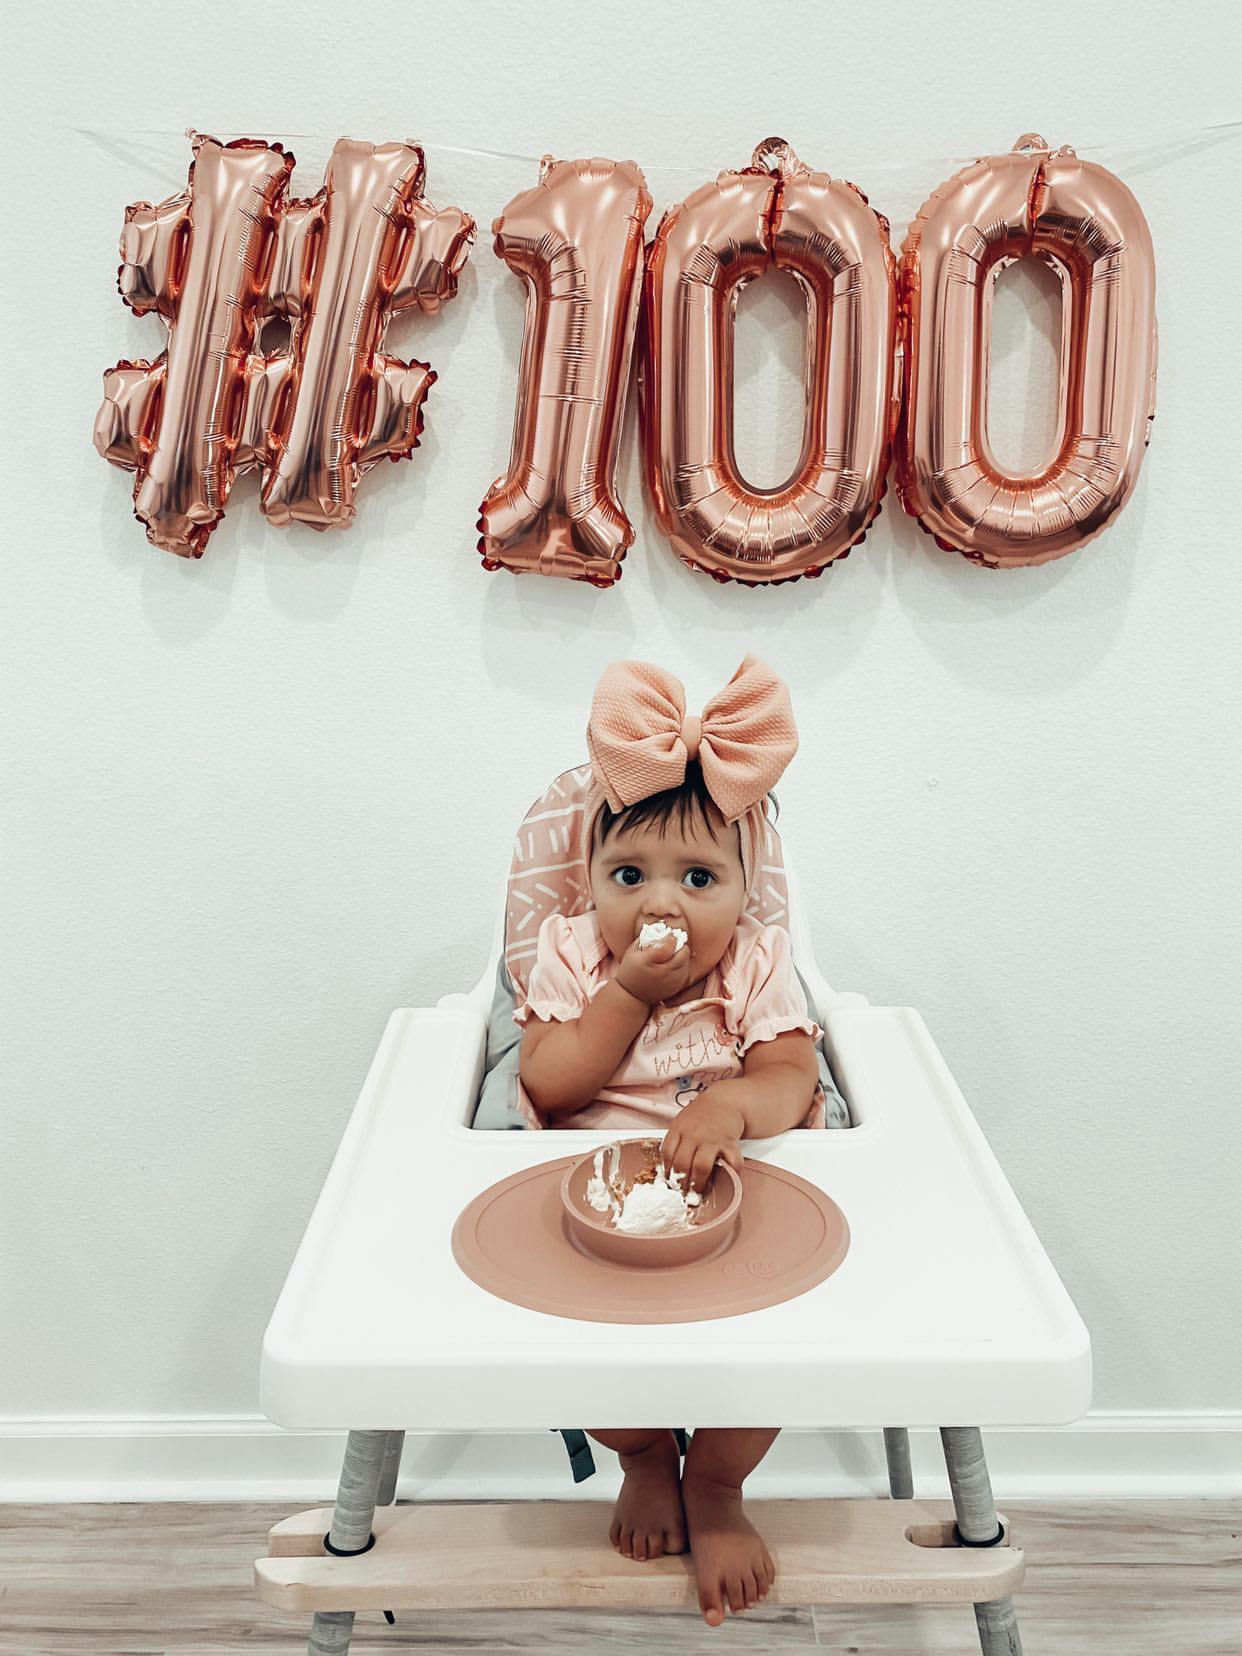 Photograph f a baby seated in Ikea Antelop high chair with 3rd party footrest and eating food out of an ezpz Tiny Bowl. Pictured in the back are balloons forming the # 1 0 0 indicating the baby's 100th first food.